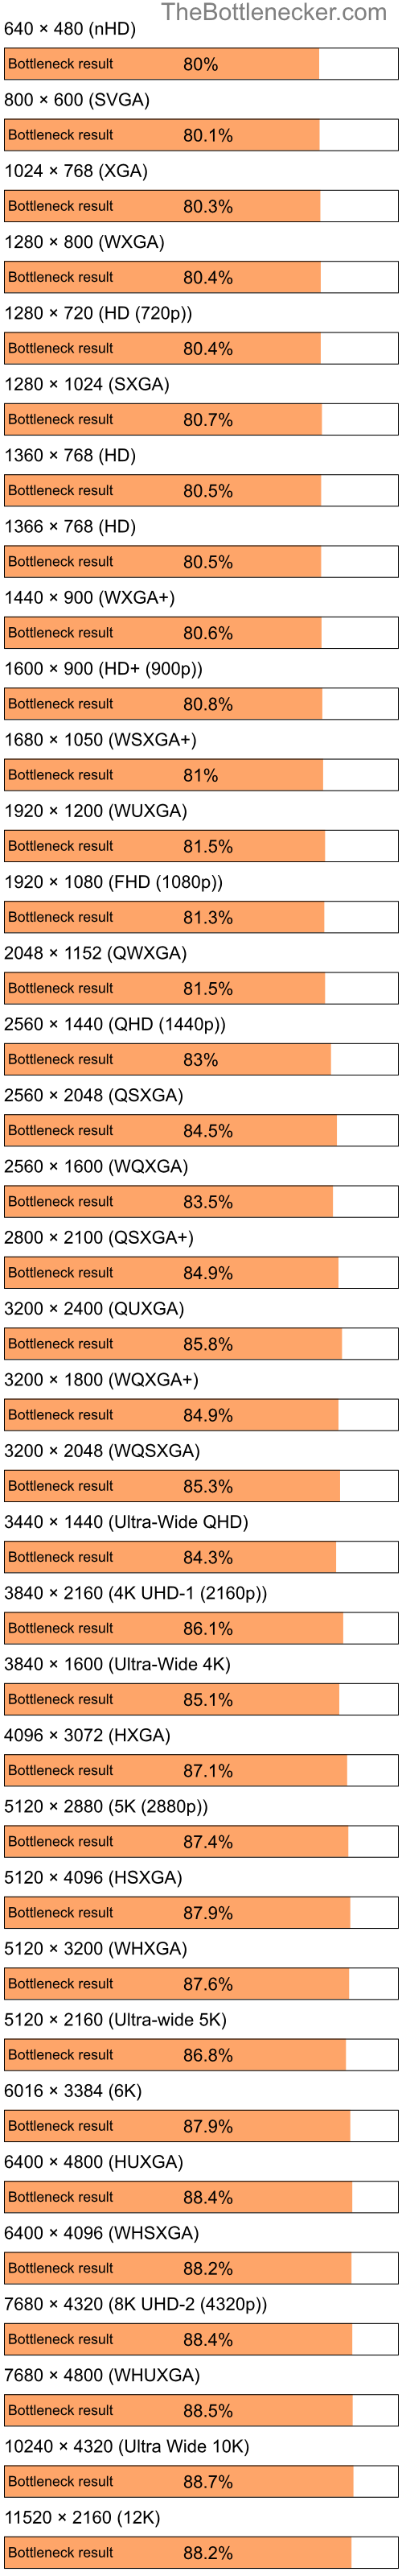 Bottleneck results by resolution for Intel Pentium 4 and AMD Radeon X1270 in Graphic Card Intense Tasks